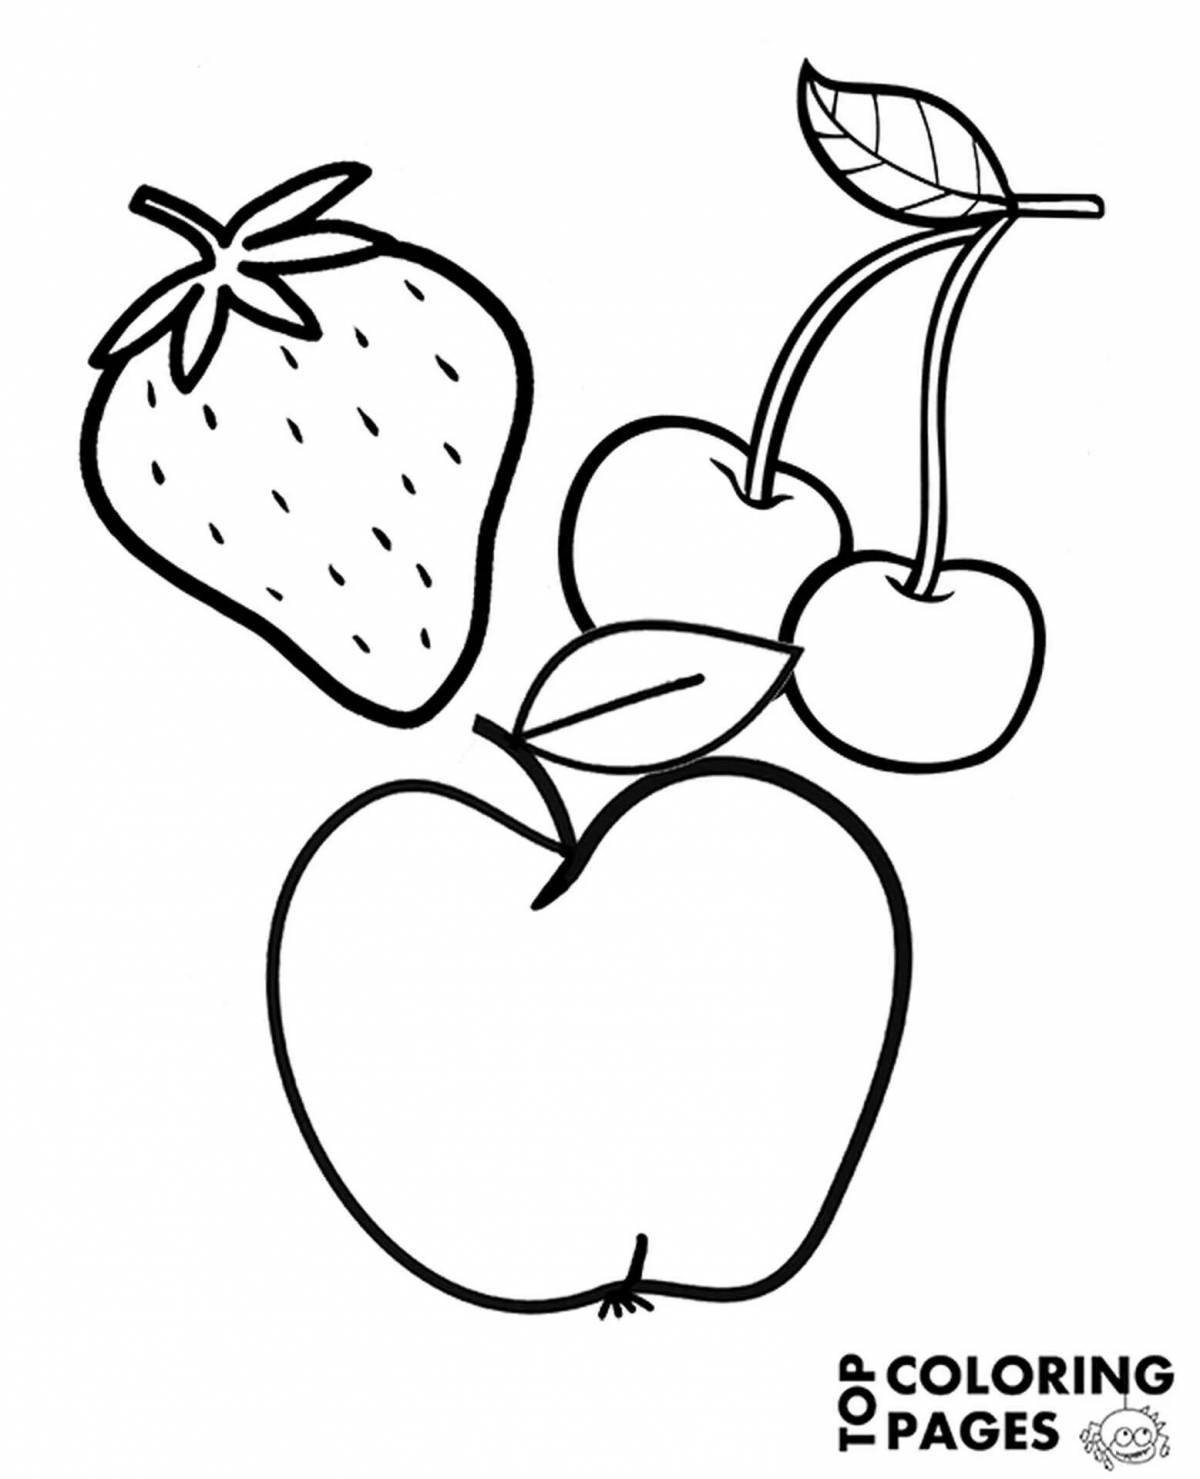 Playful apple and pear coloring page